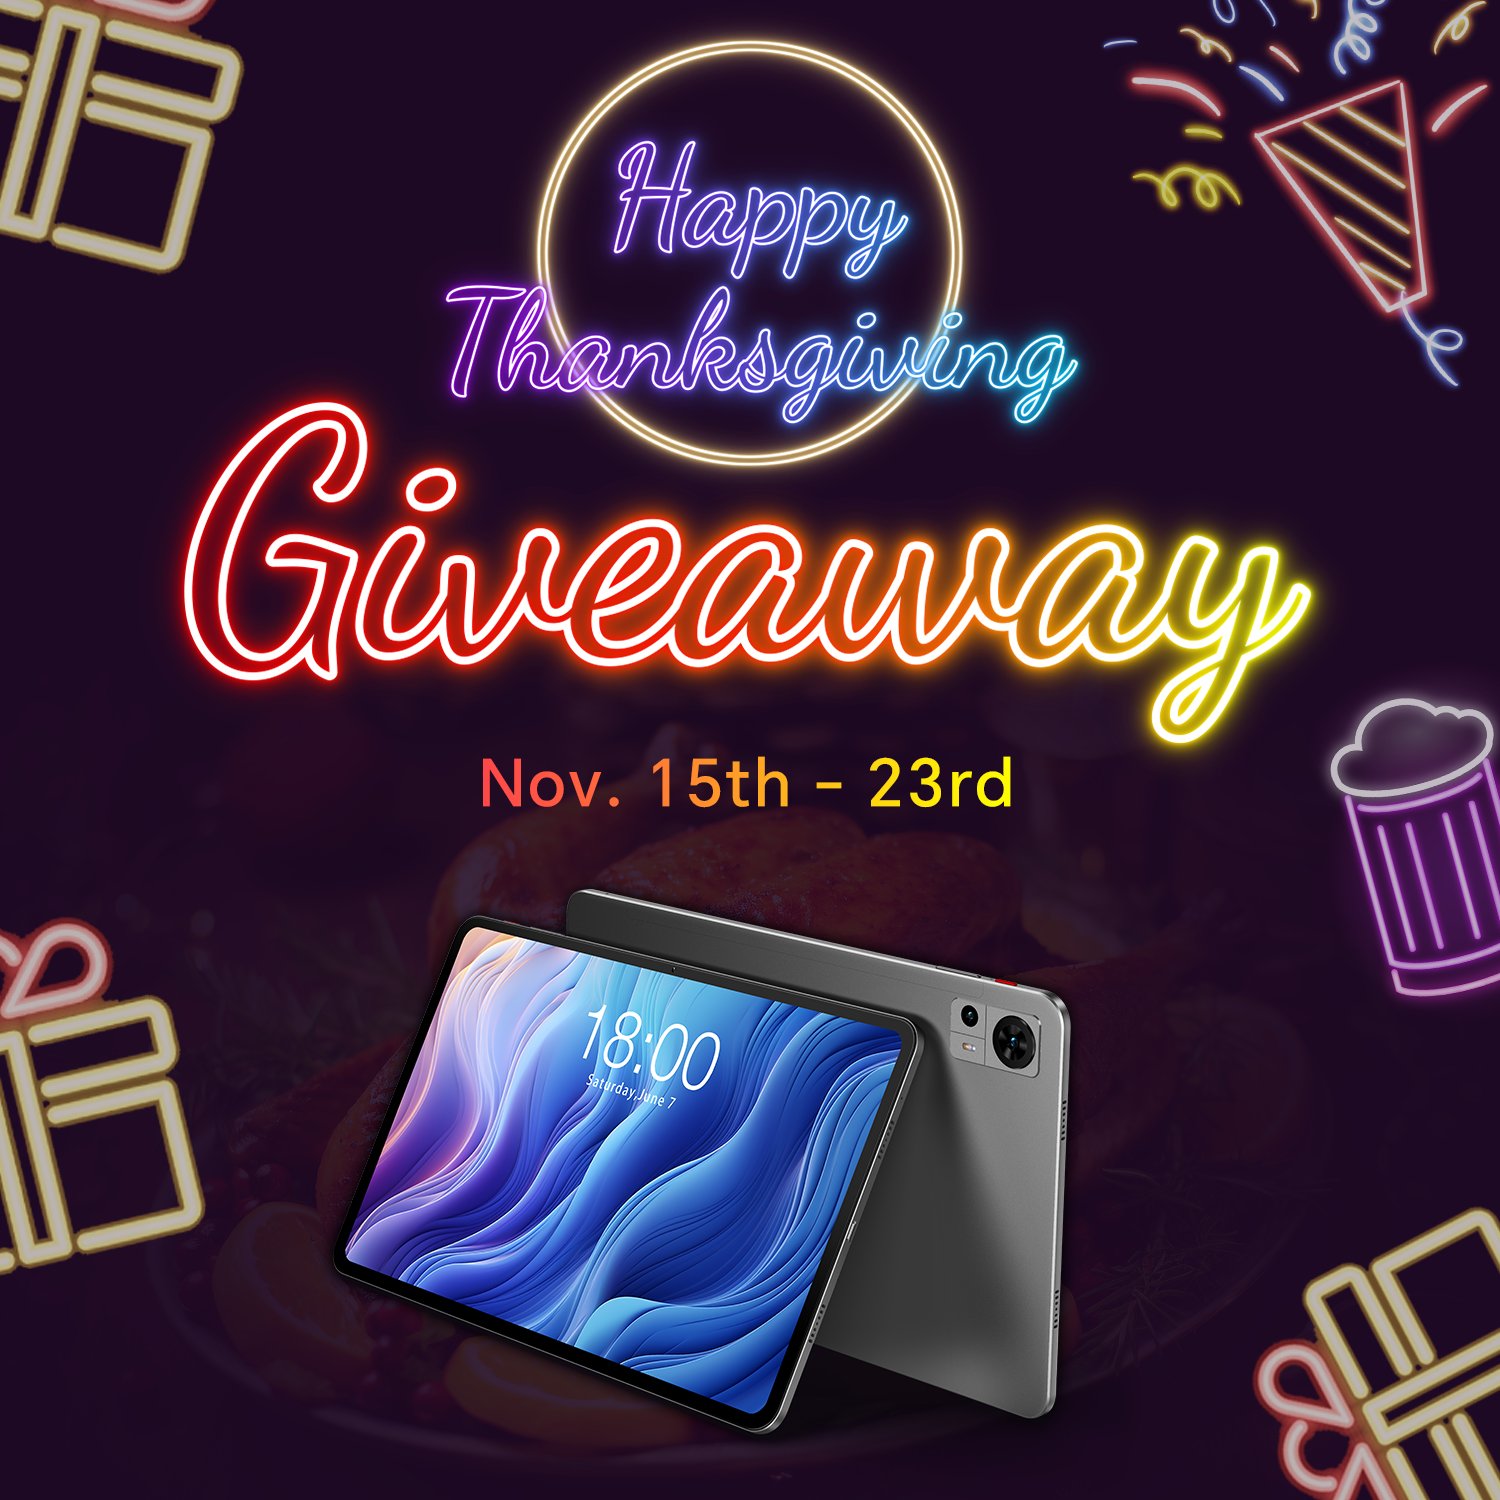 Teclast Official on X: BLACK FRIDAY SPECIAL! We're taking the excitement  up a notch this Black Friday with a special giveaway! Get ready to win our  brand new T60 Tablet! Follow All